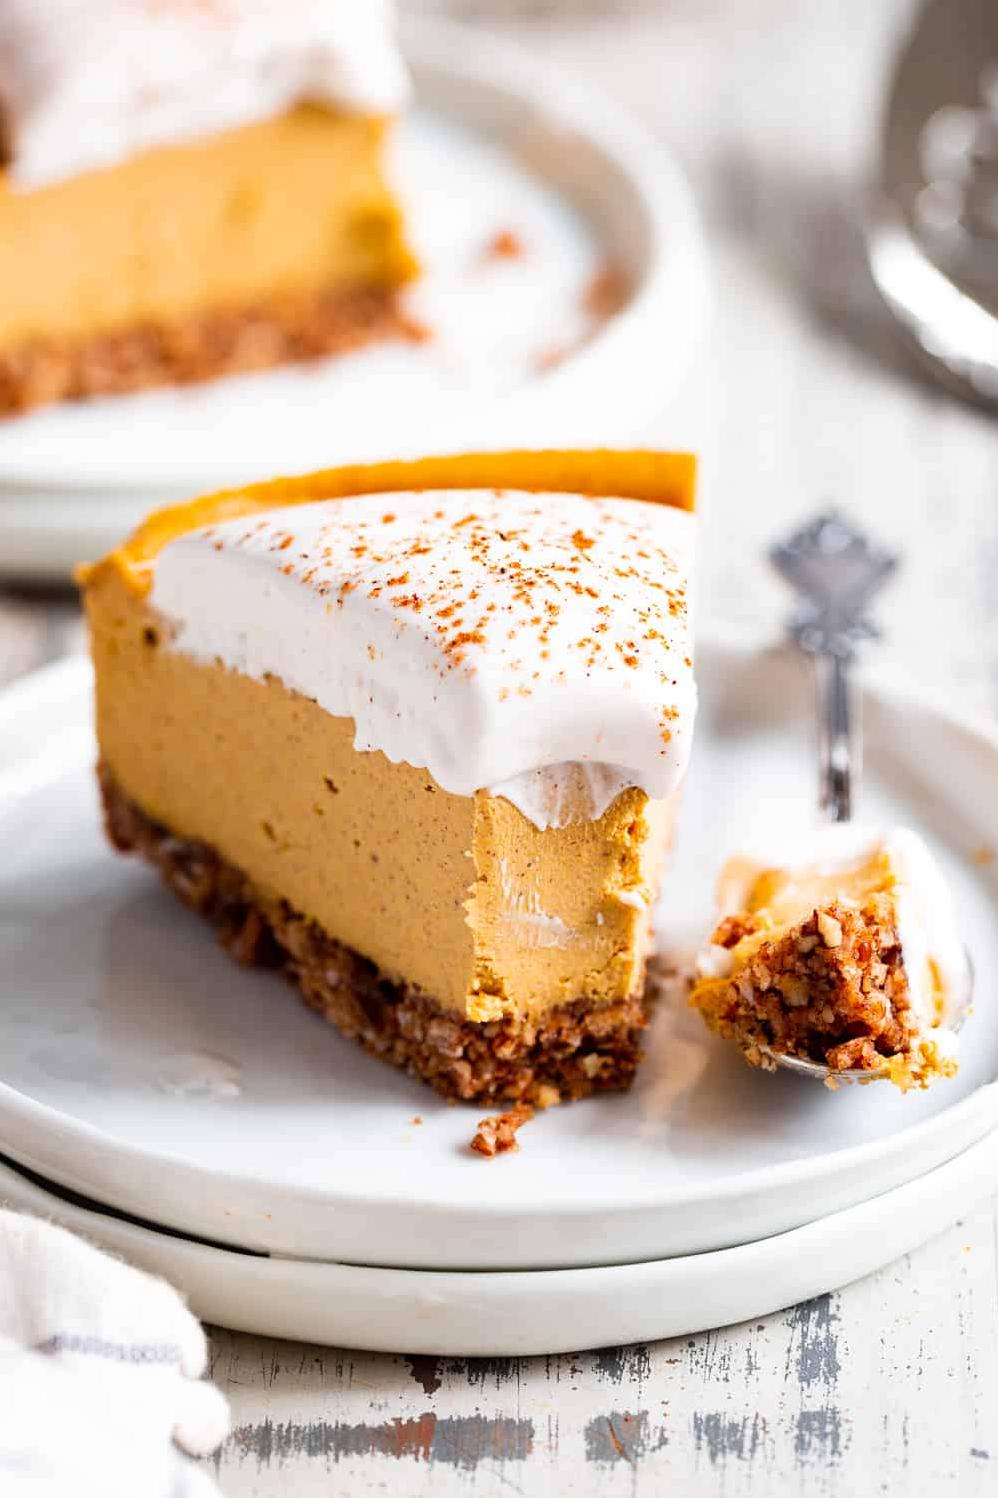  Just in time for fall: a creamy, delicious pumpkin cheesecake that's lactose-free!